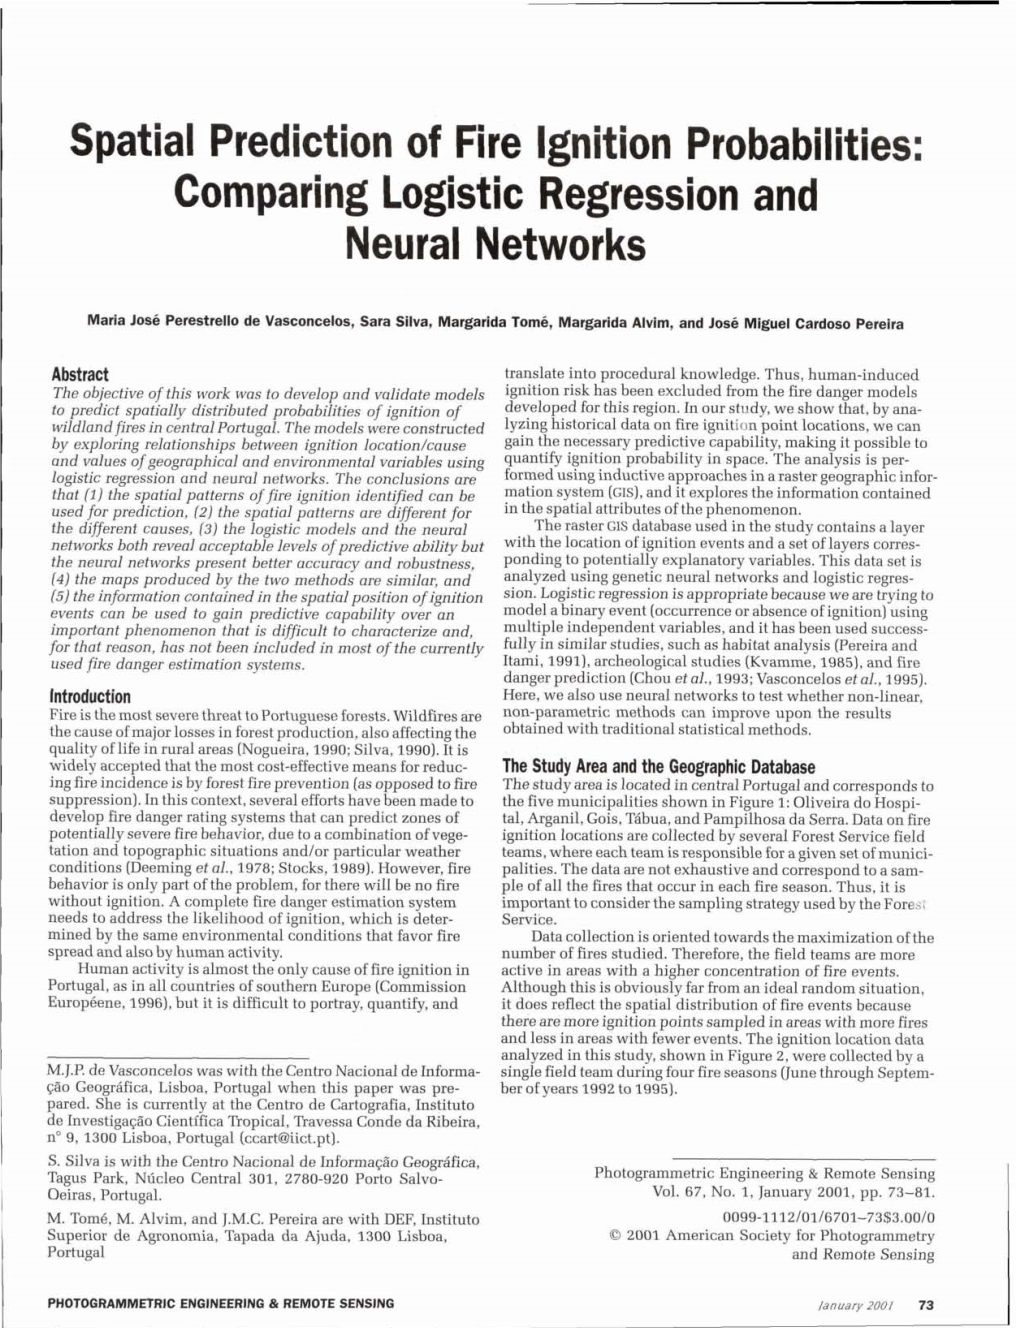 Spatial Prediction of Fire Ignition Probabilities: Comparing Logistic Regression and Neural Networks